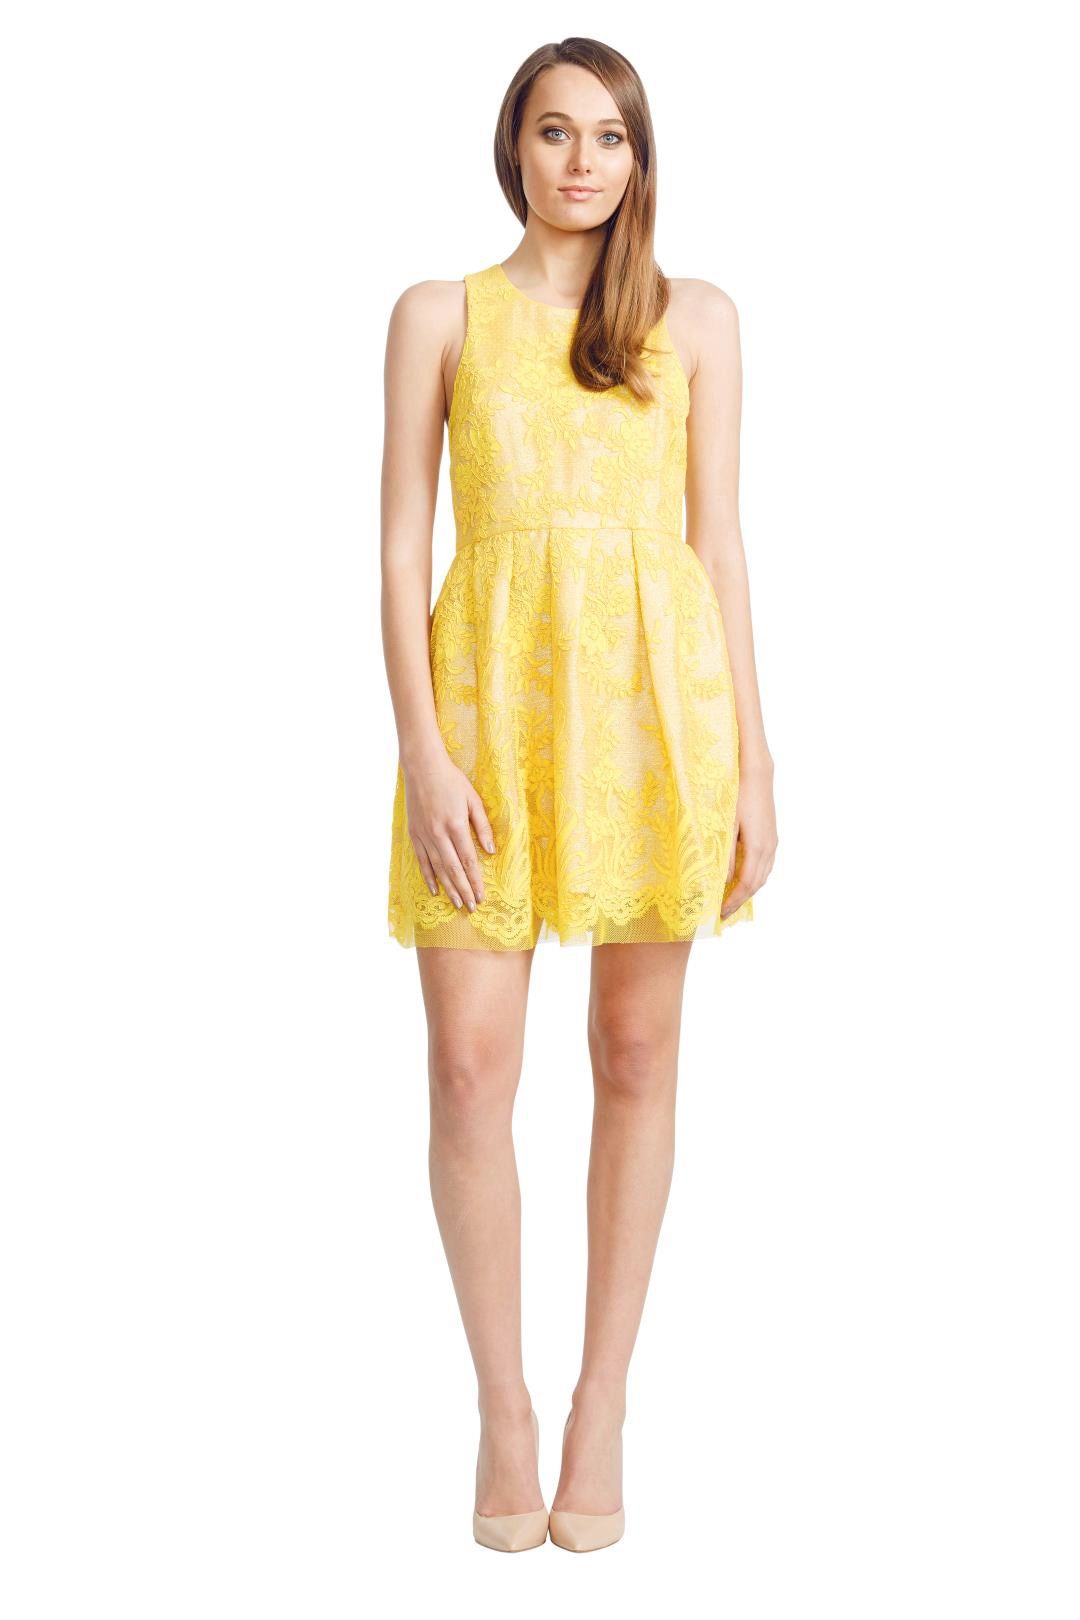 Alex Perry - Billie Dress - Yellow - Front